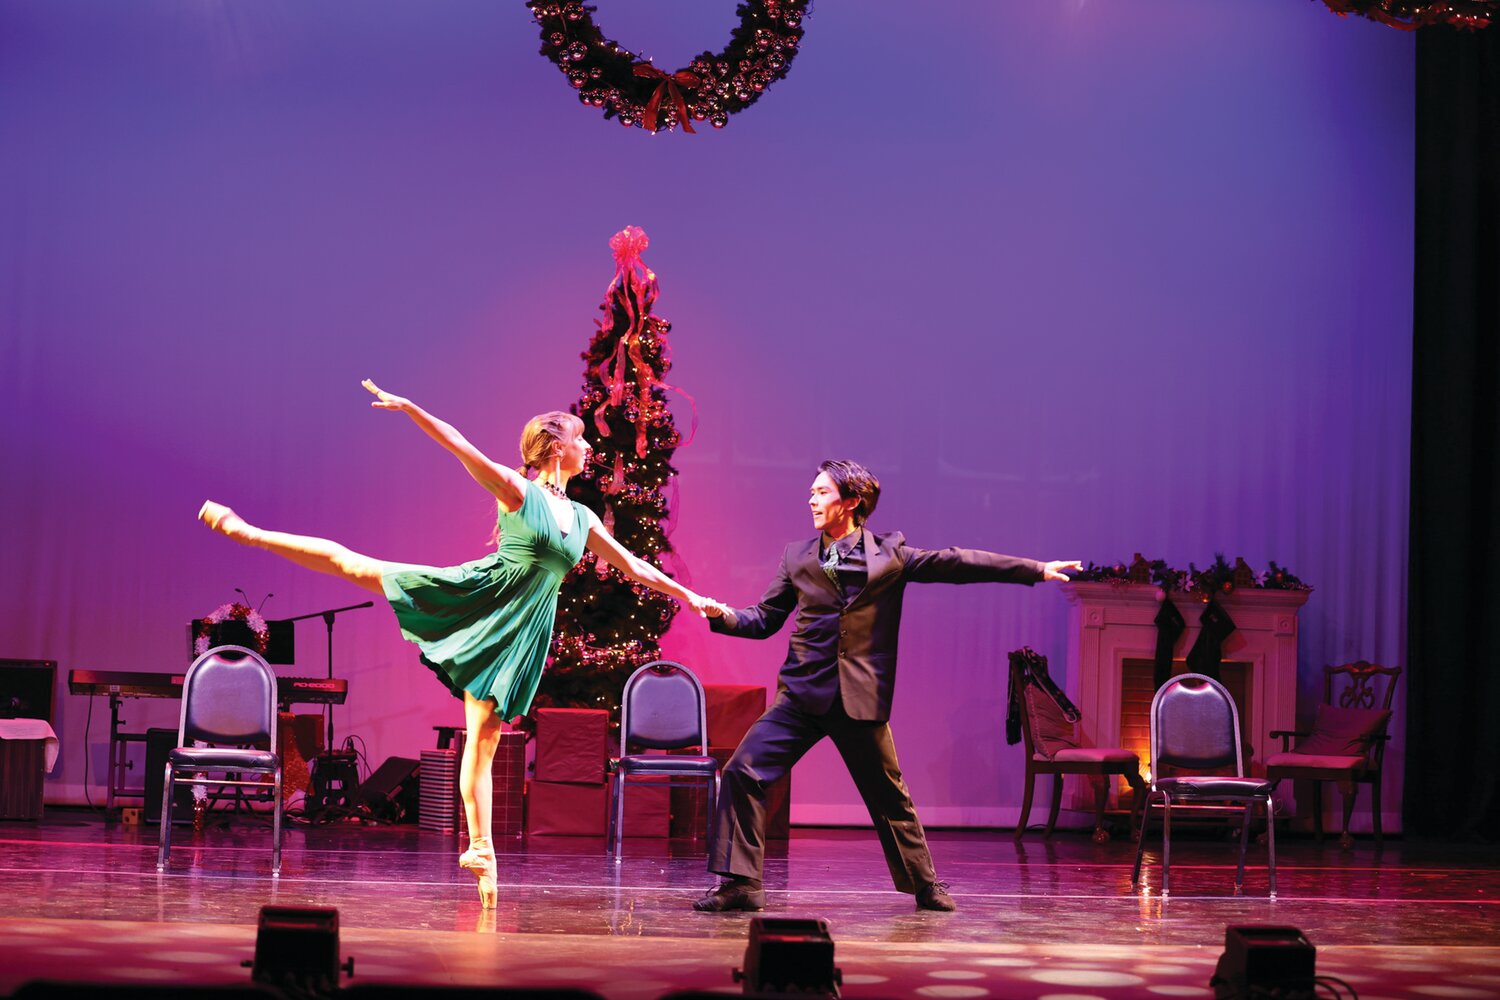 Dancers take part in the 2022 “A Very Lambertville Holiday Celebration.” Tickets are now available for the third annual event, taking place Dec. 20.